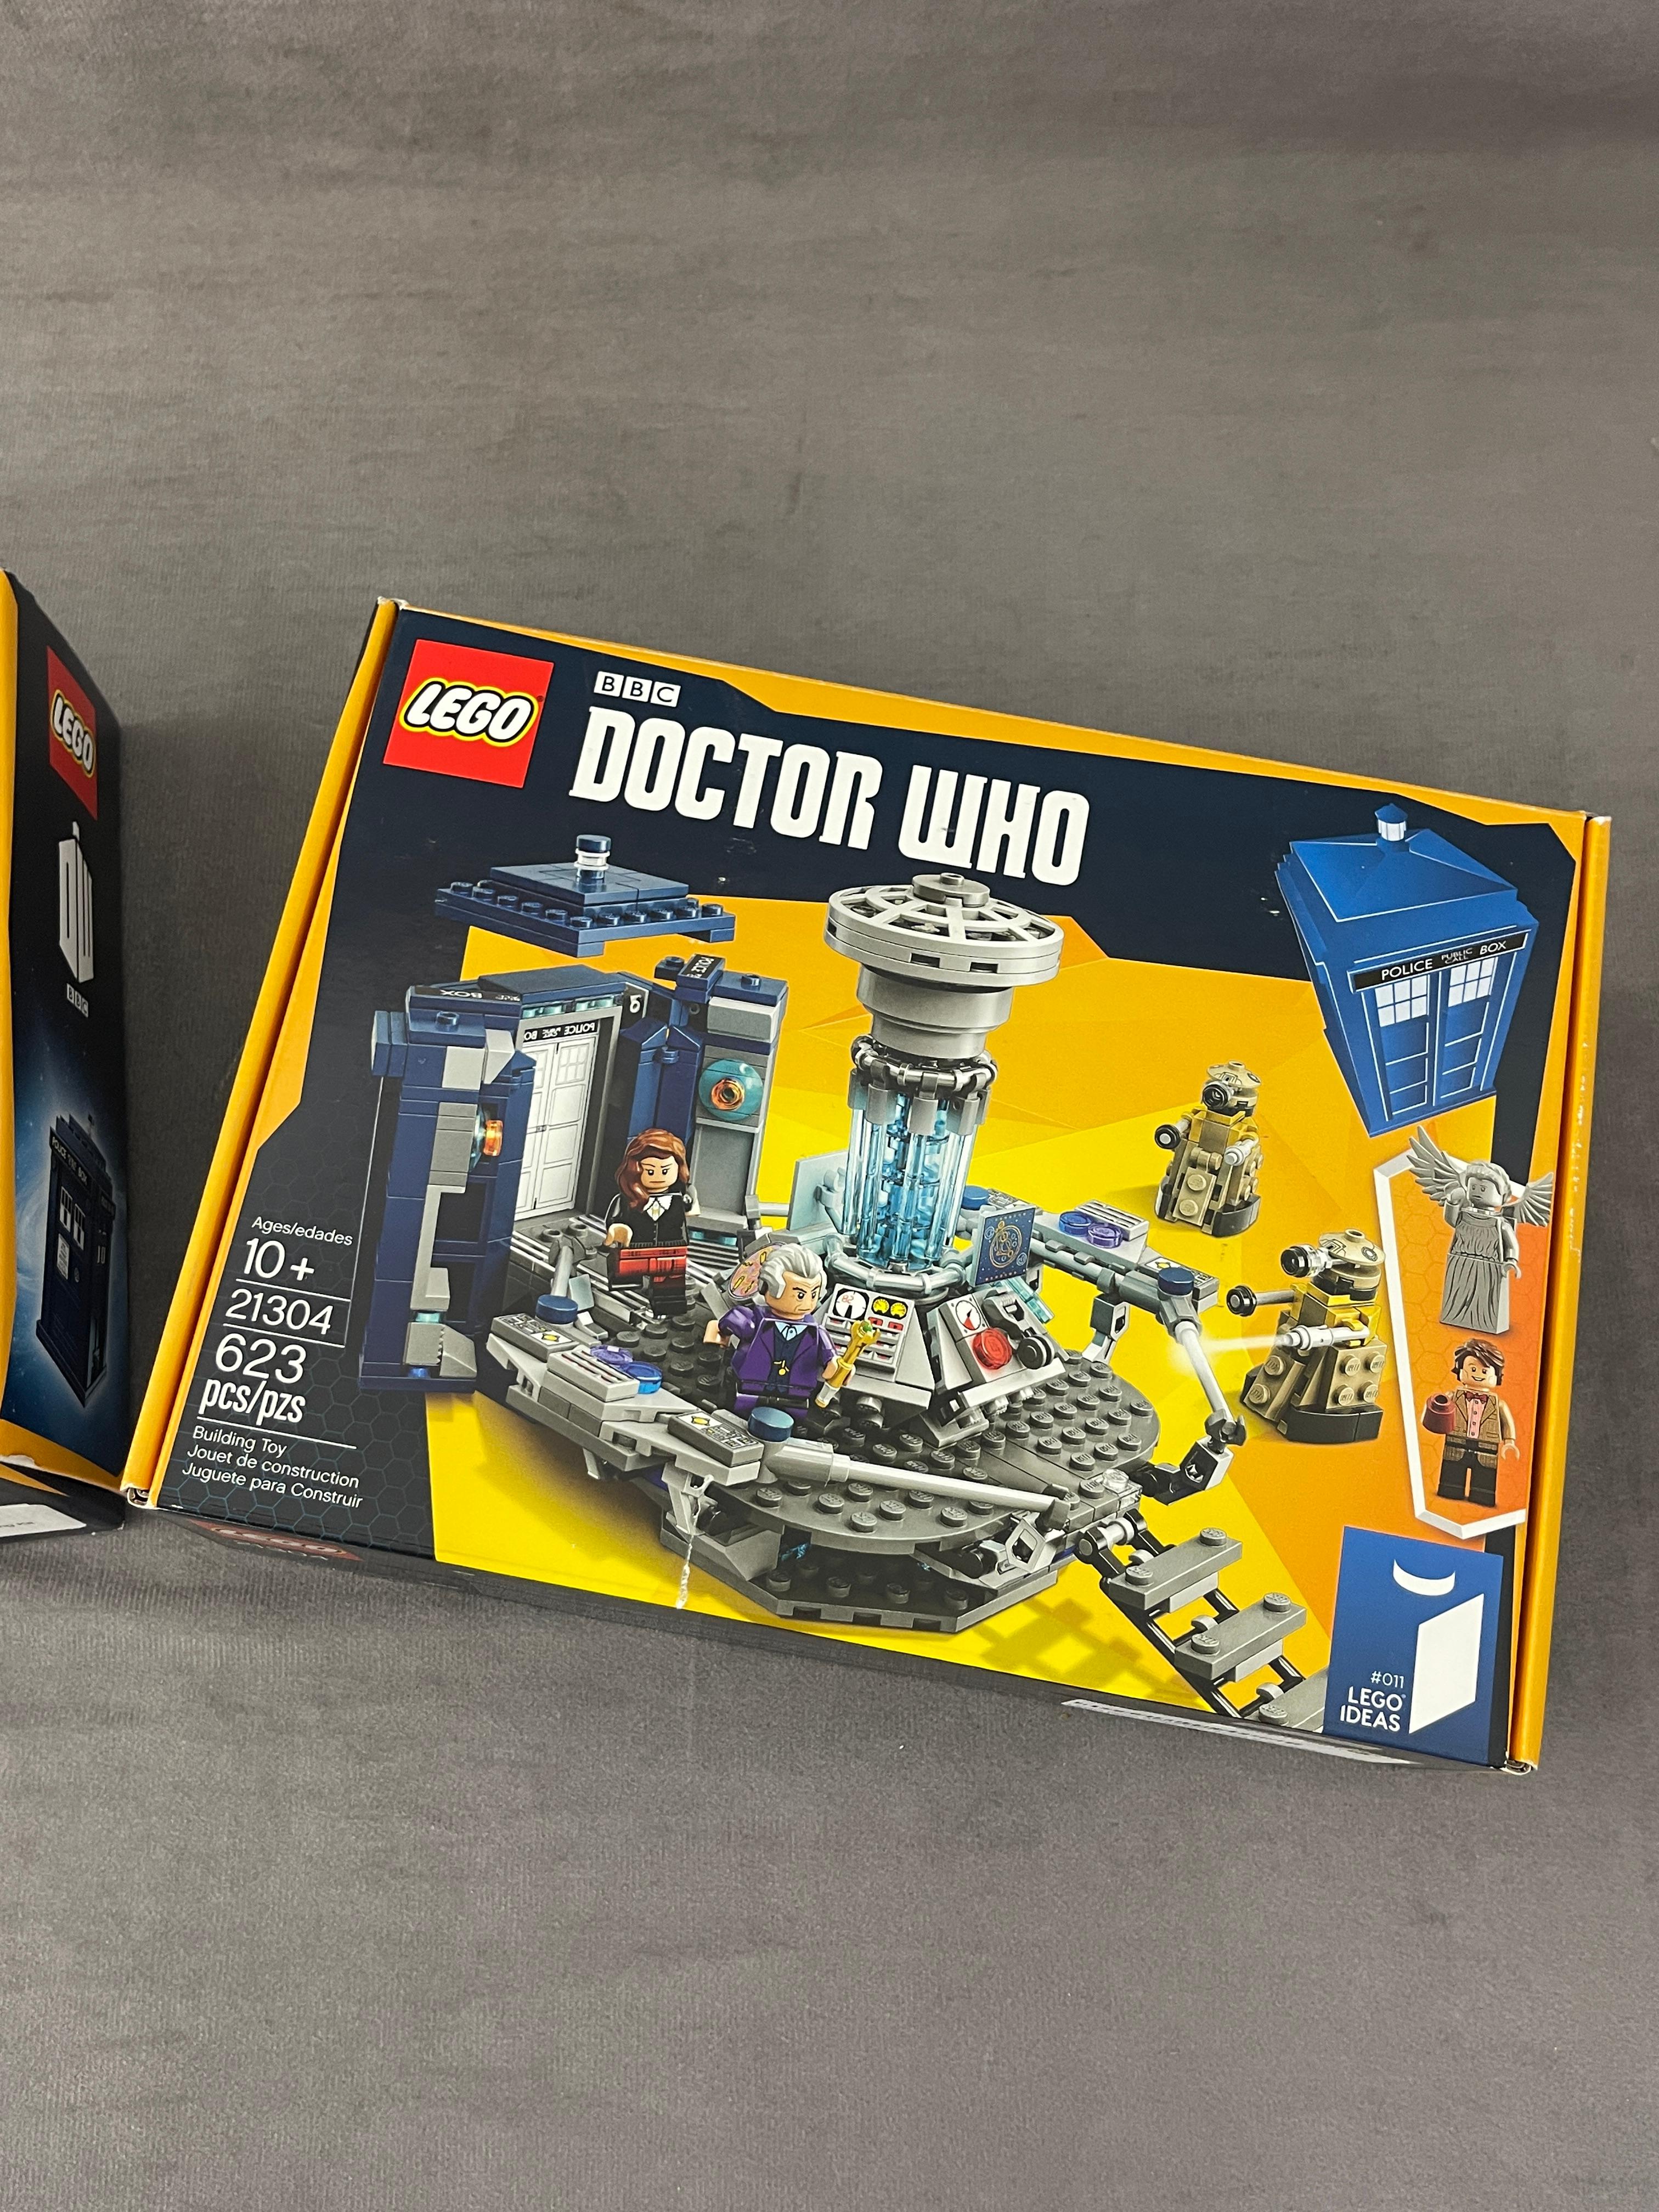 LEGO Doctor Who 21304 Building Kit Opened Box Some Pieces Lot